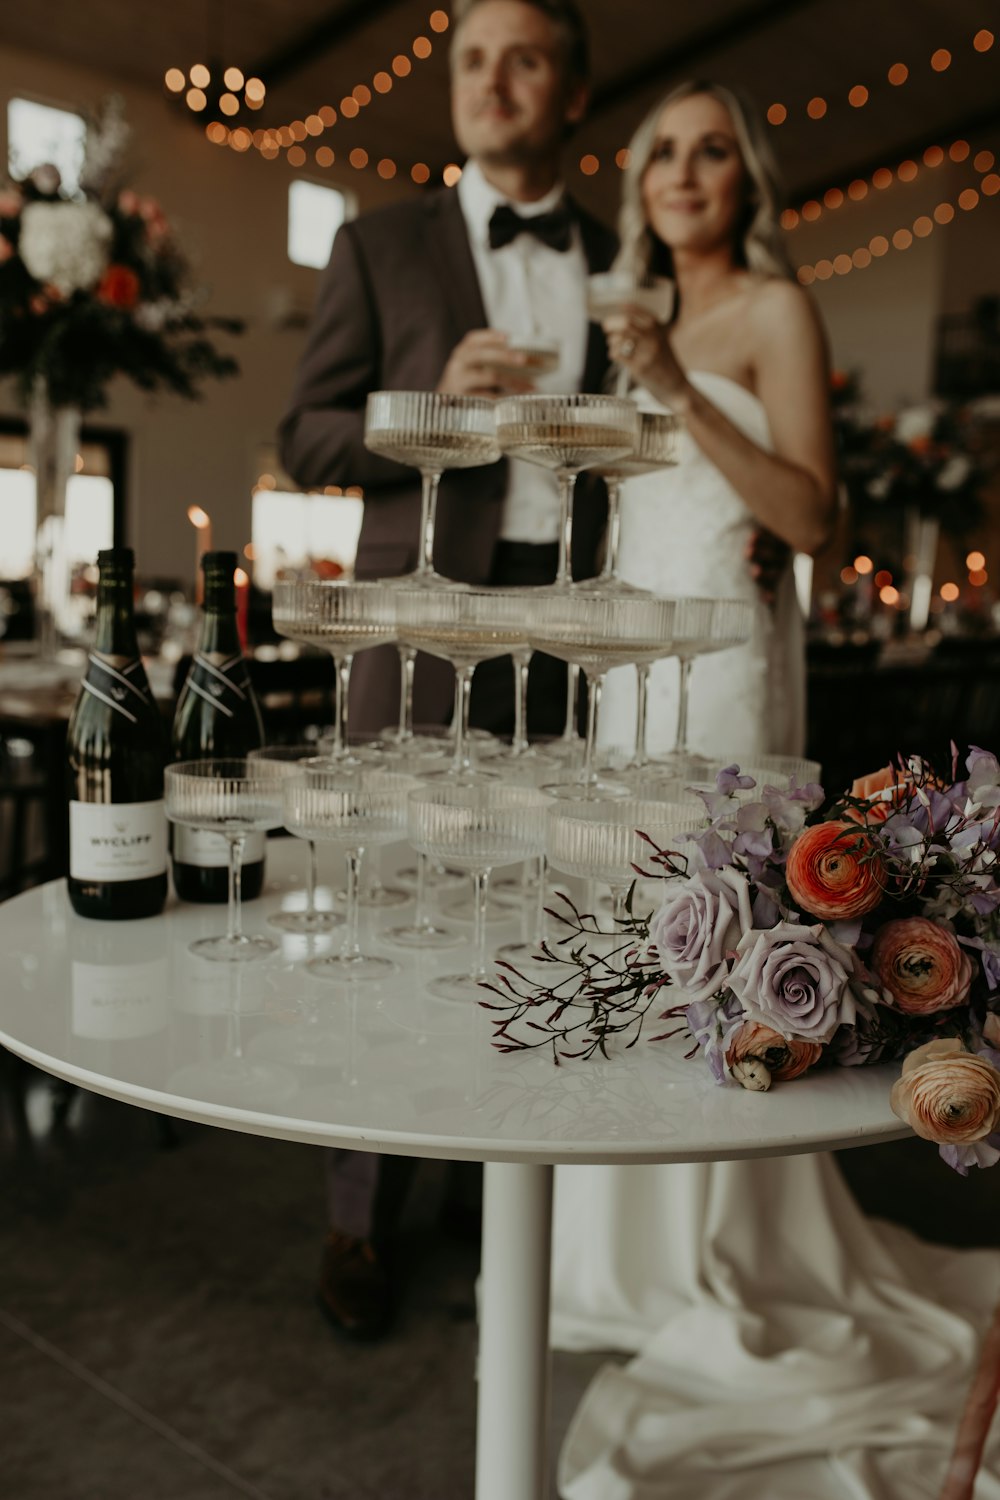 a man and a woman standing next to a table with wine glasses on it